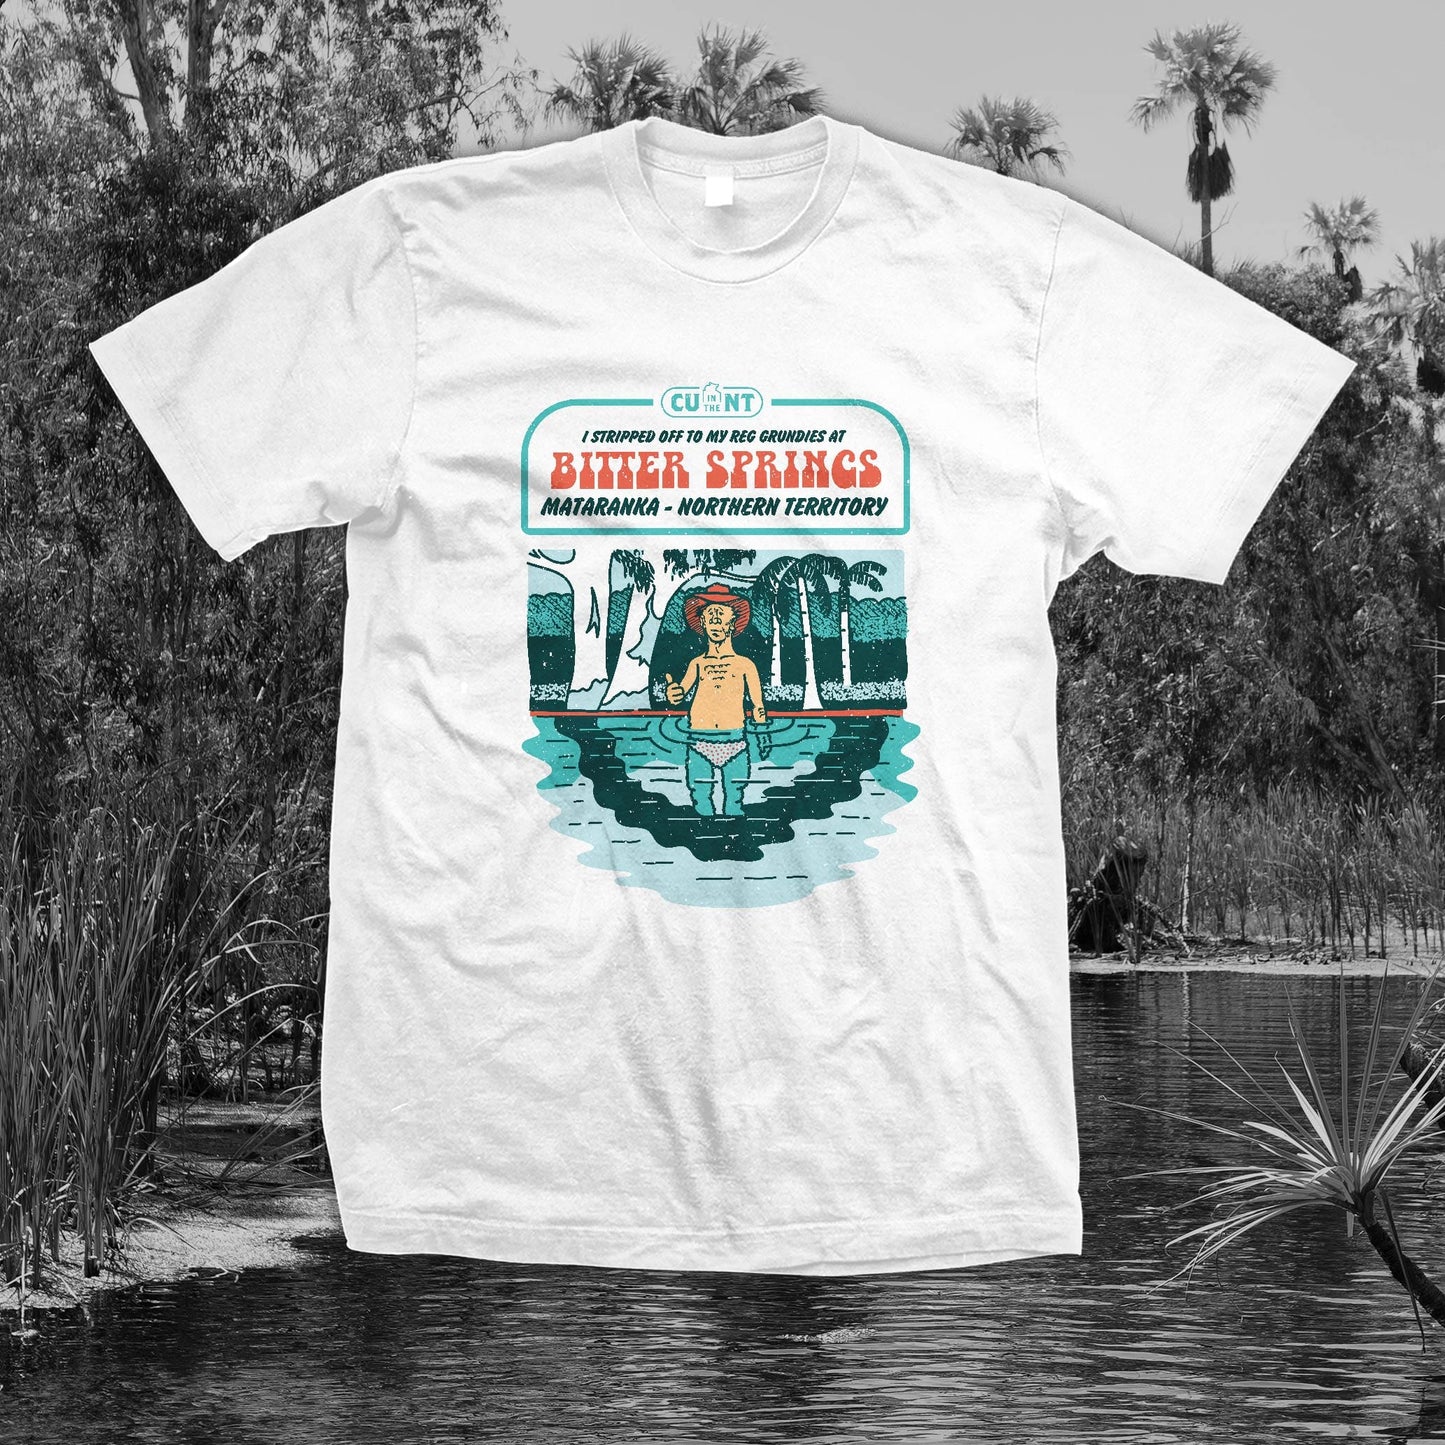 Destination Bitter Springs - White Tee Shirts NT Unofficial